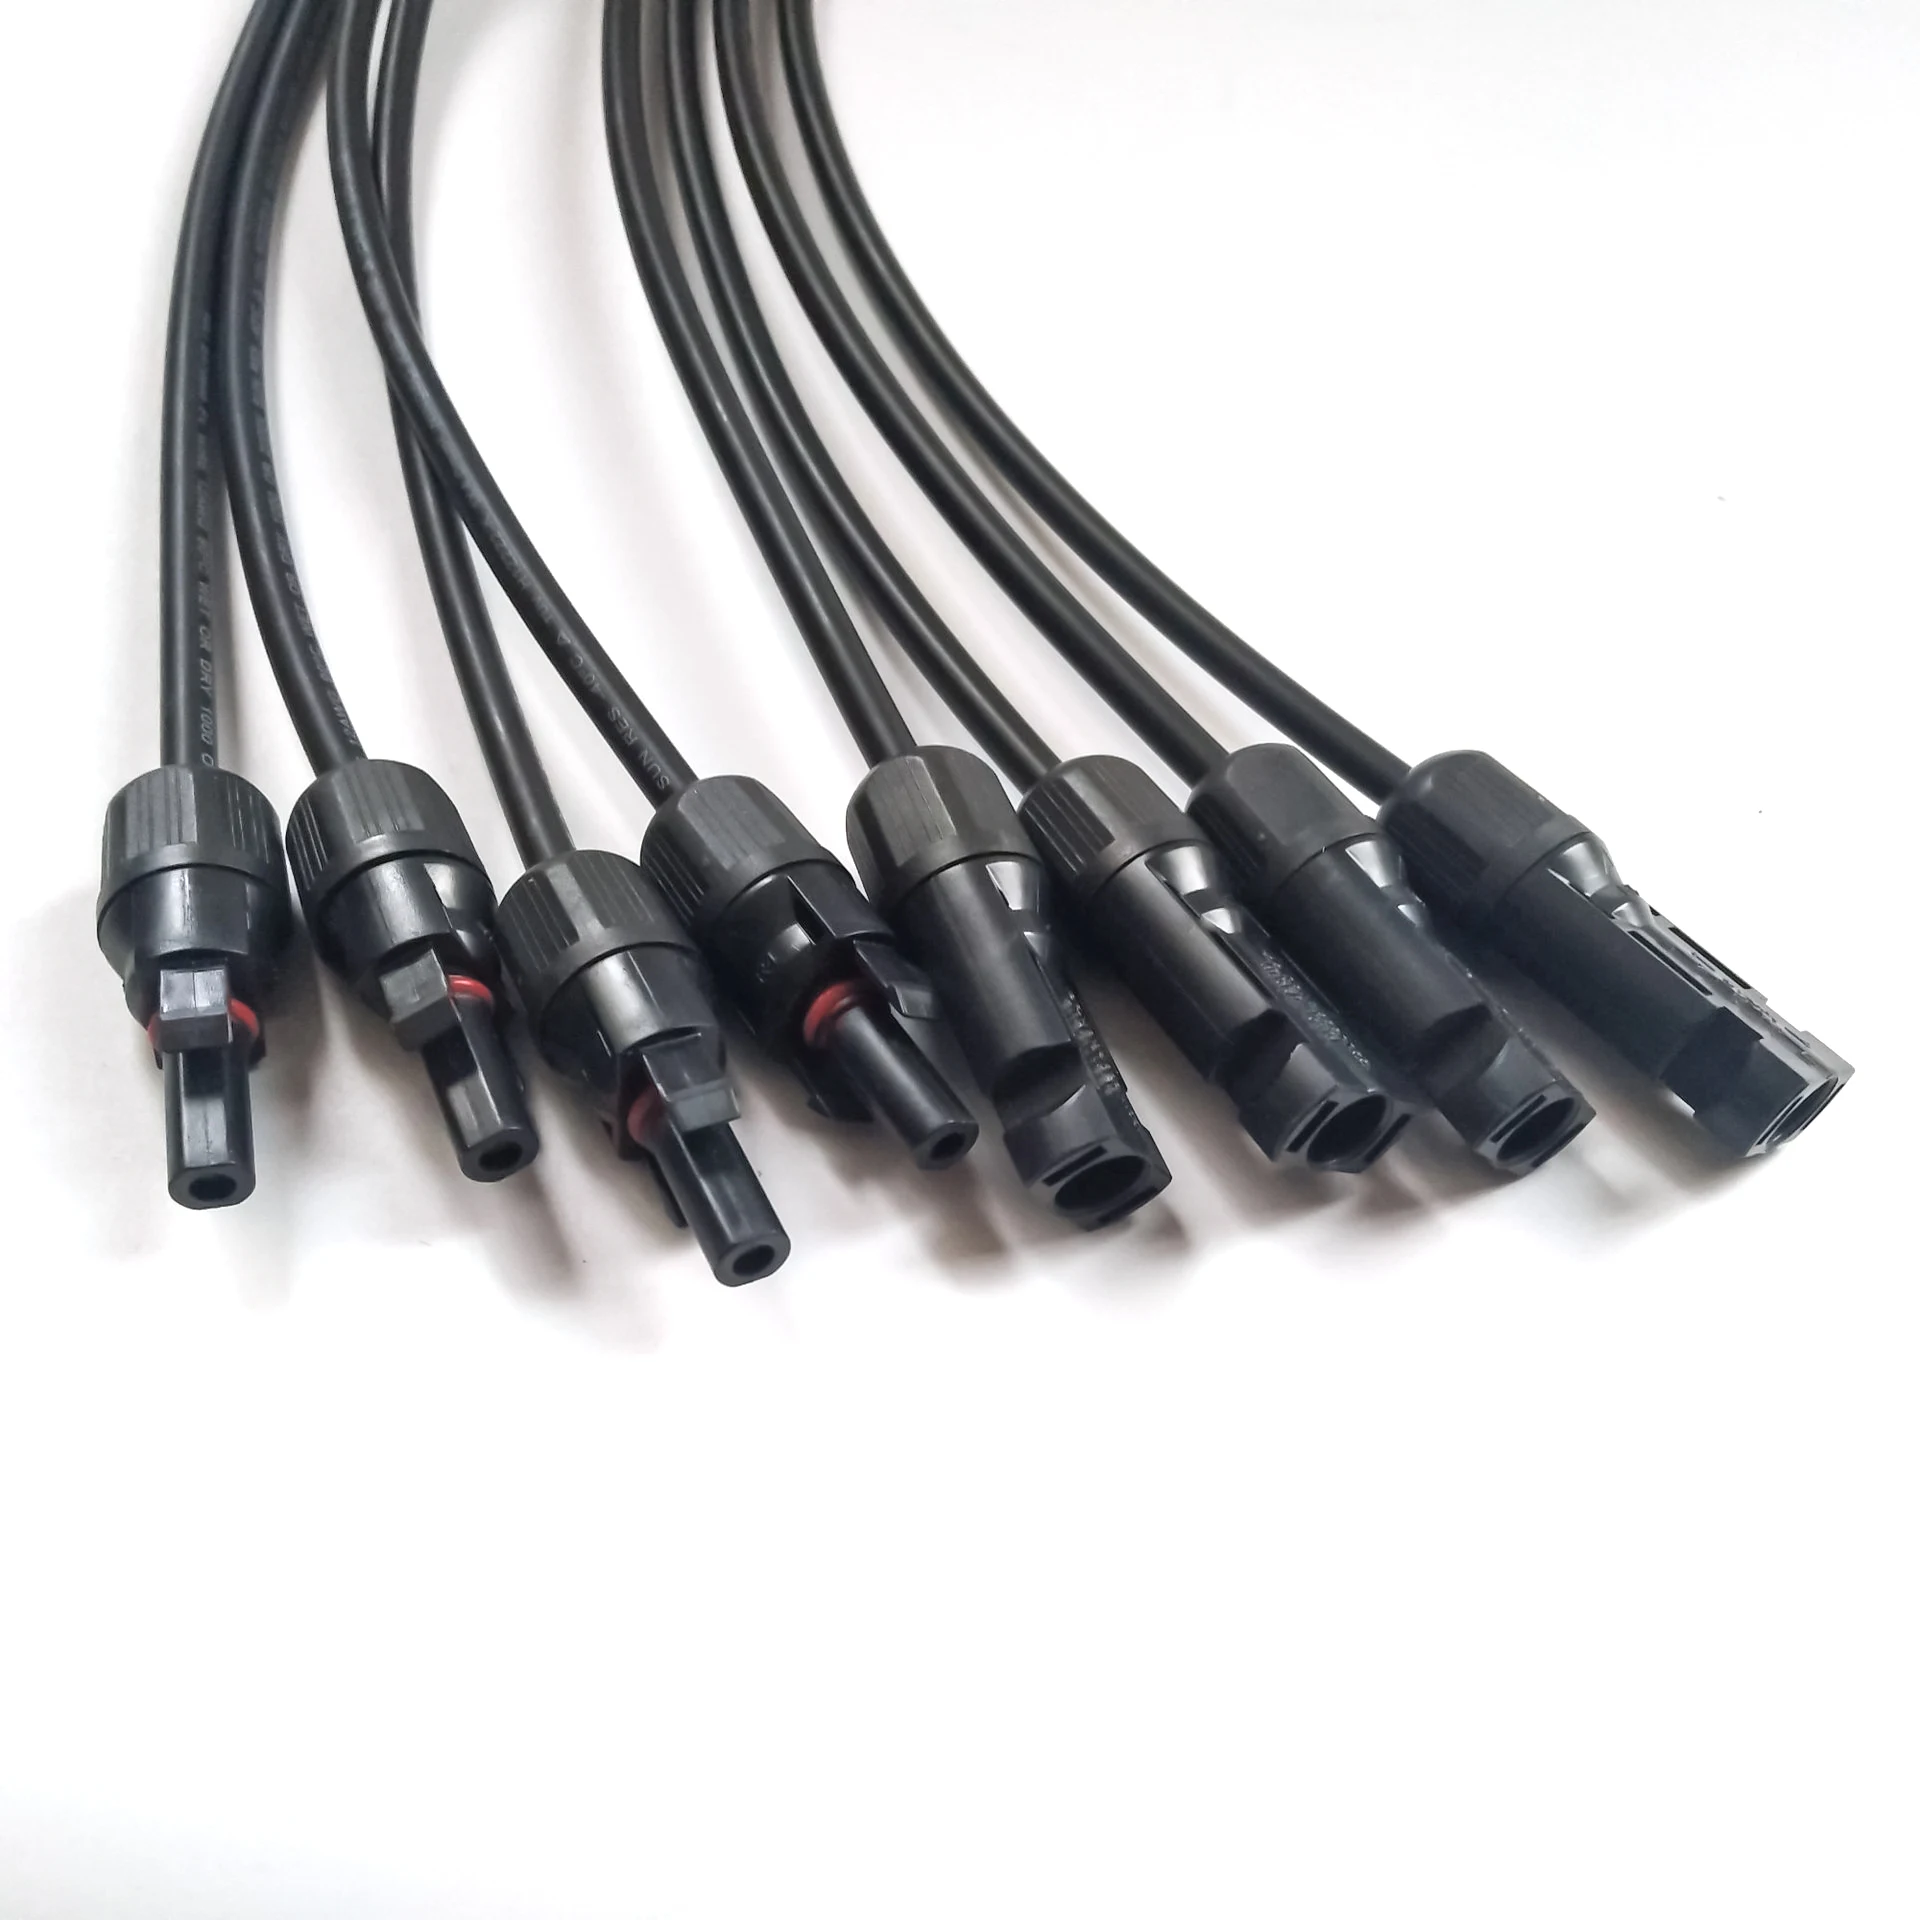 OEM FC Cable Connectors: Unlocking Customized Connectivity Solutions